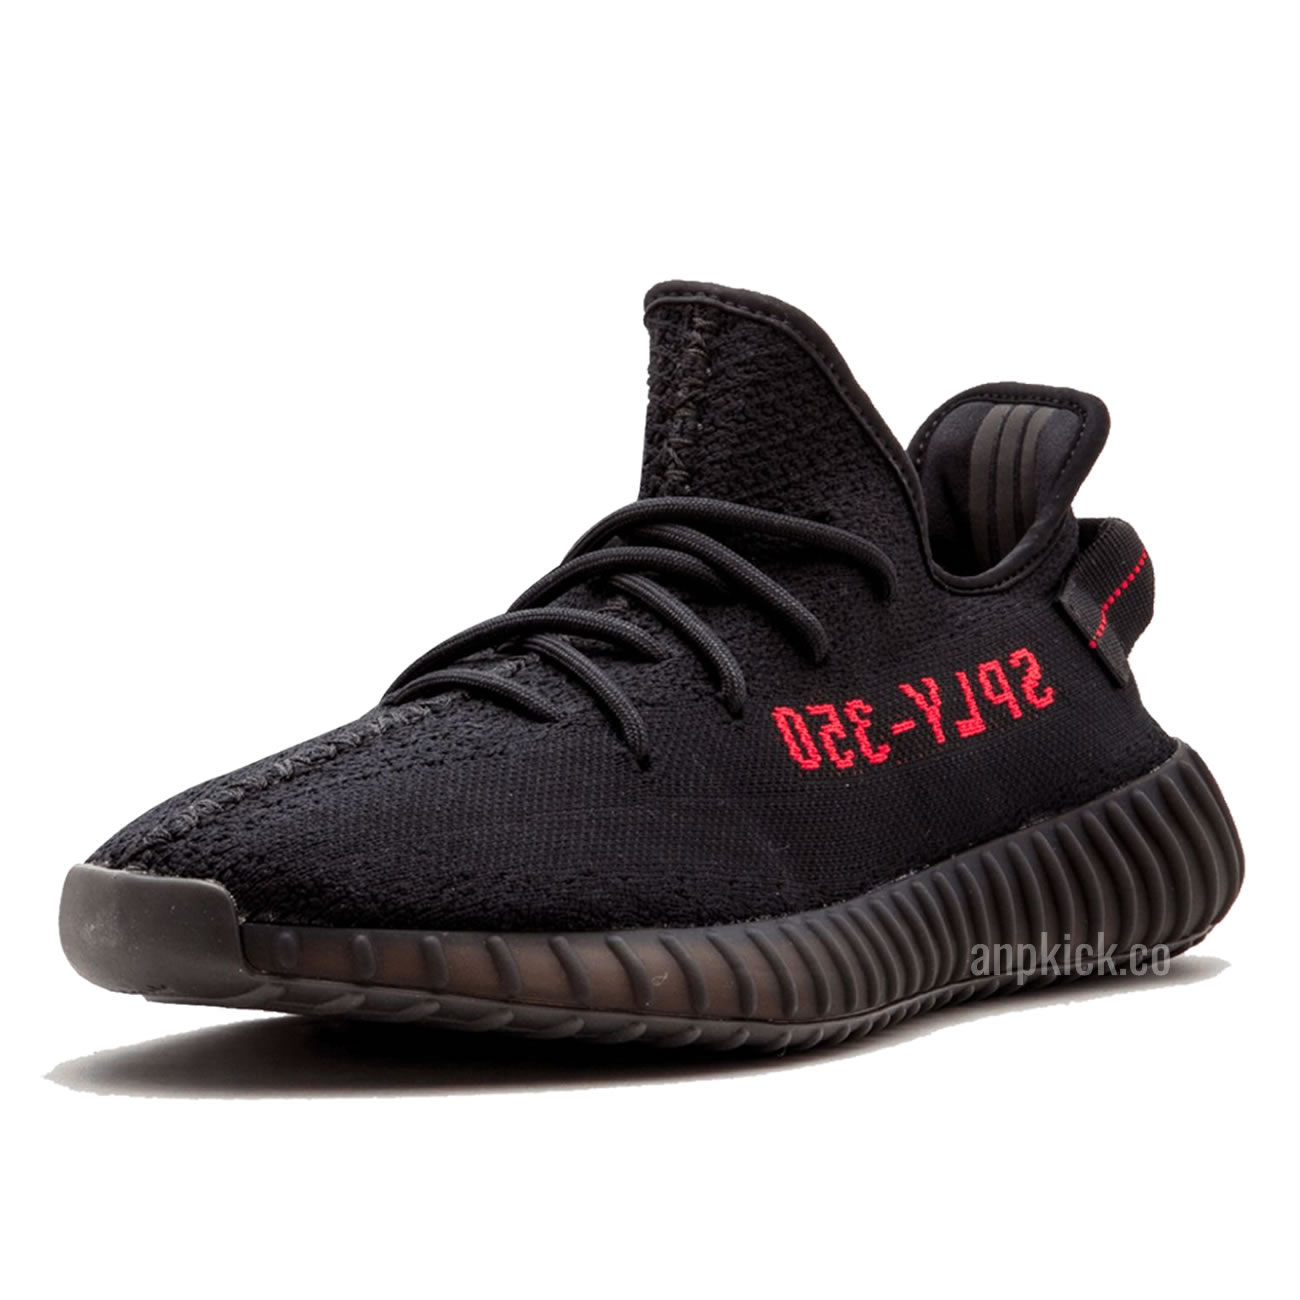 Yeezy Boost 350 V2 Bred Black Red 2020 New Release Cp9652 (4) - www.newkick.org